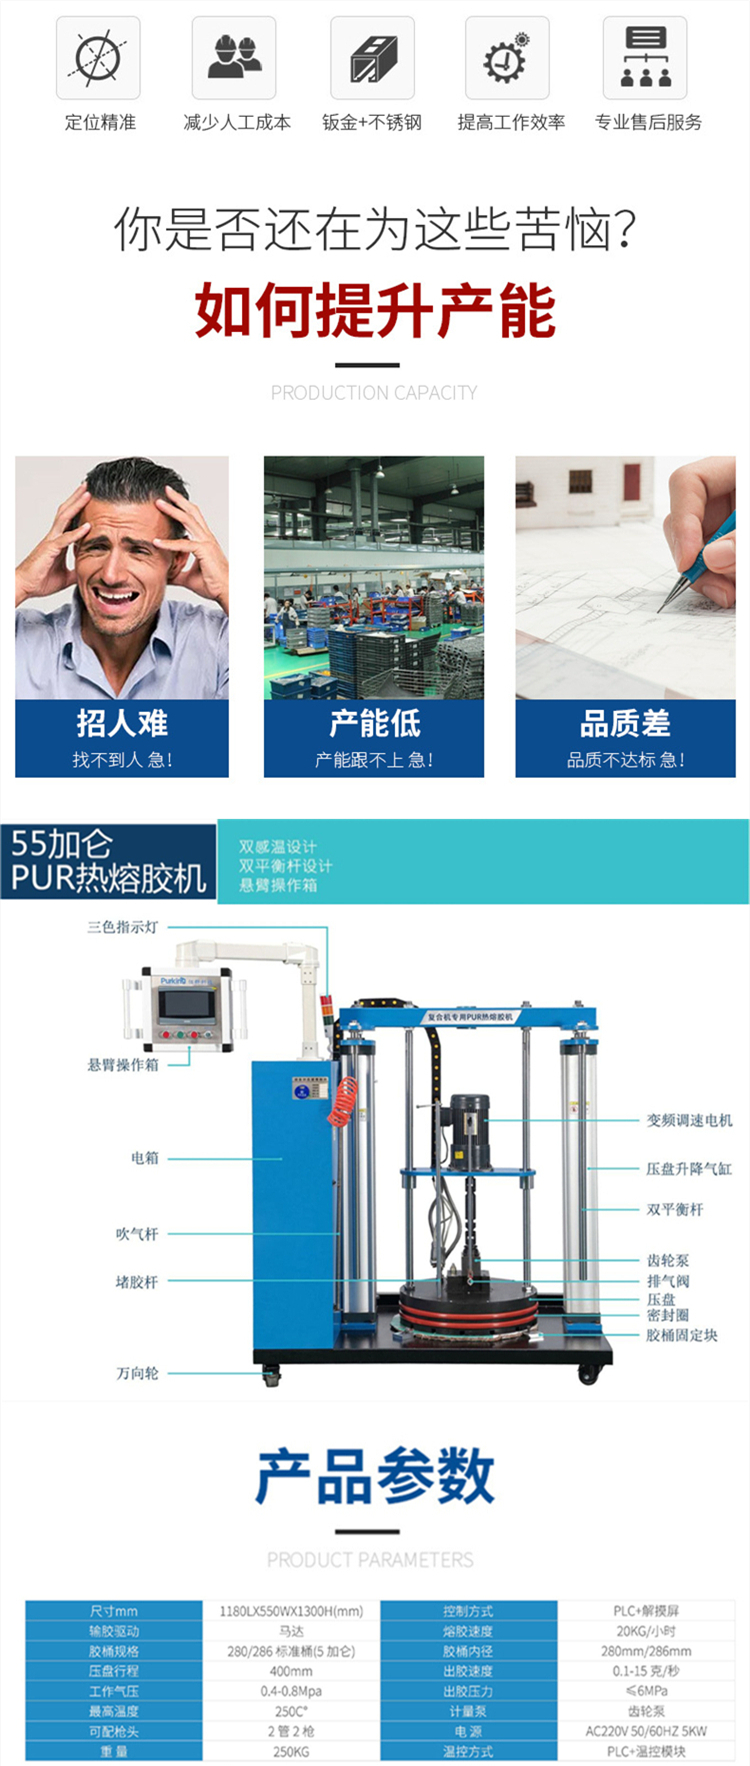 The manufacturer provides a new instant type PUR glue machine with a small automatic gear pump PUR hot melt glue machine